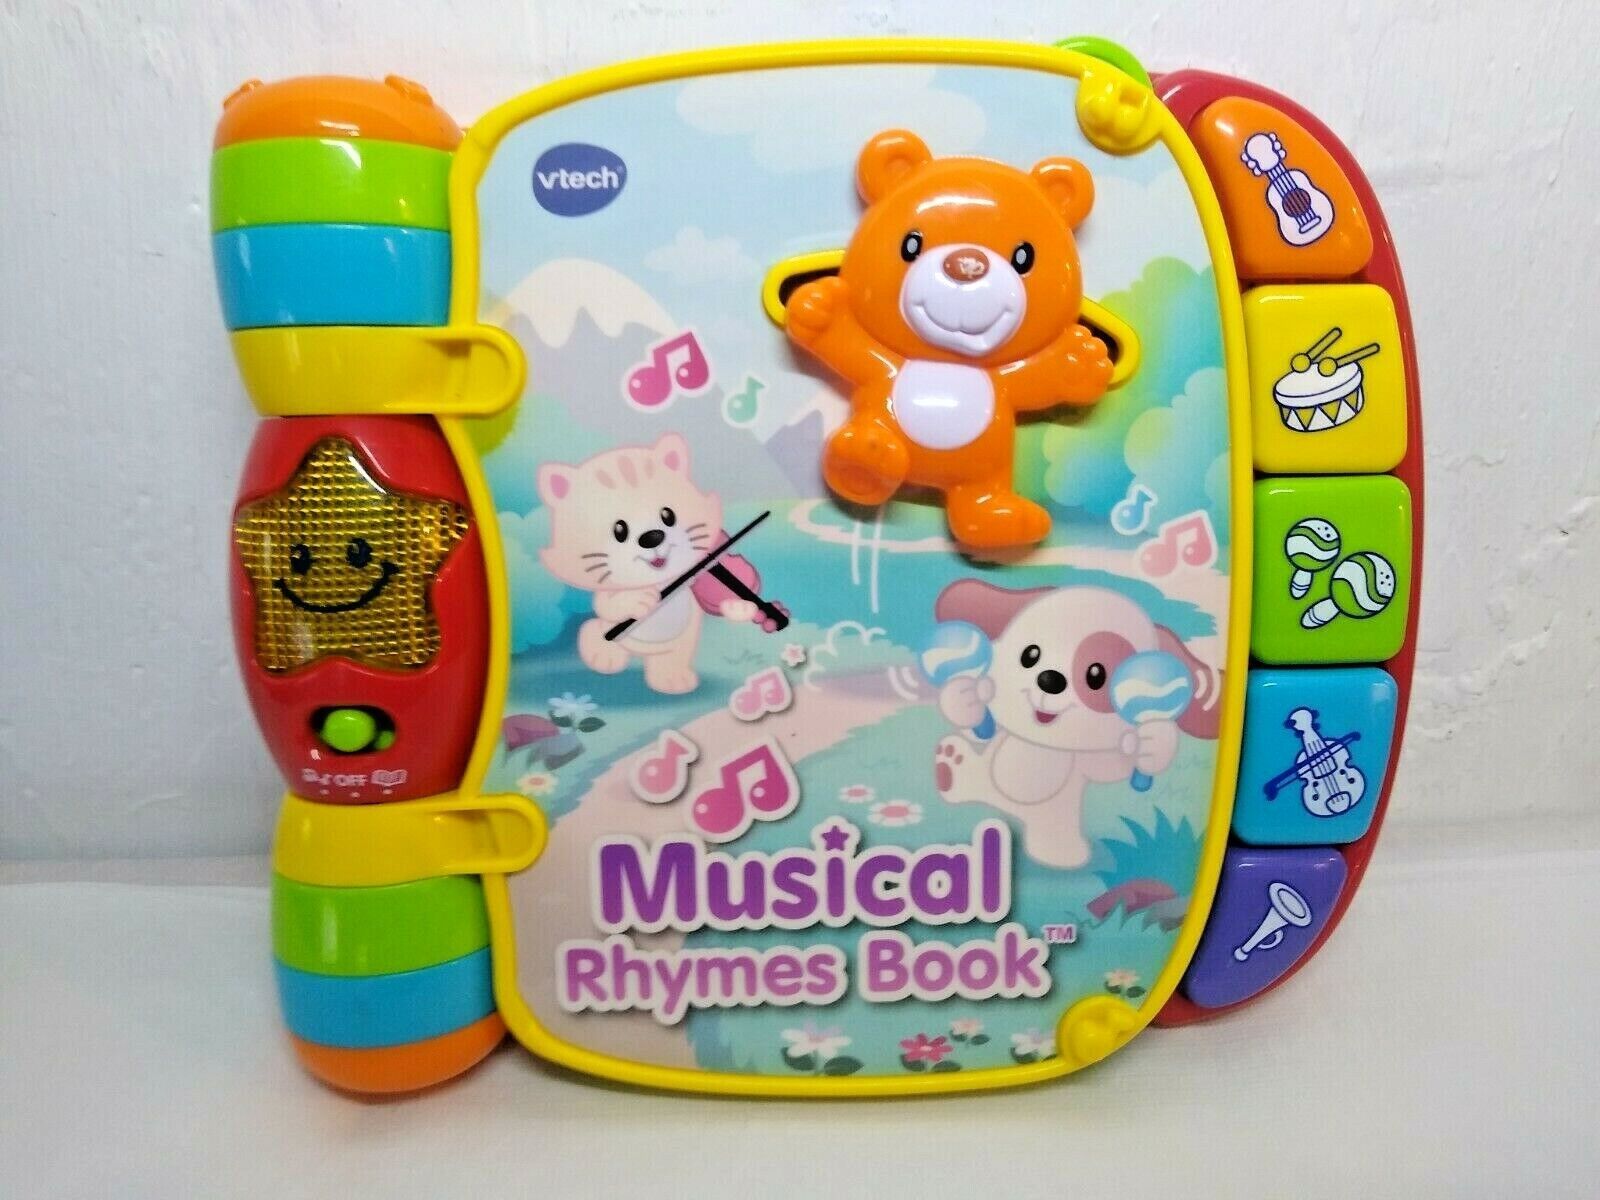 Vtech Baby Musical Rhymes Book Learning & Educational Toys for Babies & Kids  - $12.58